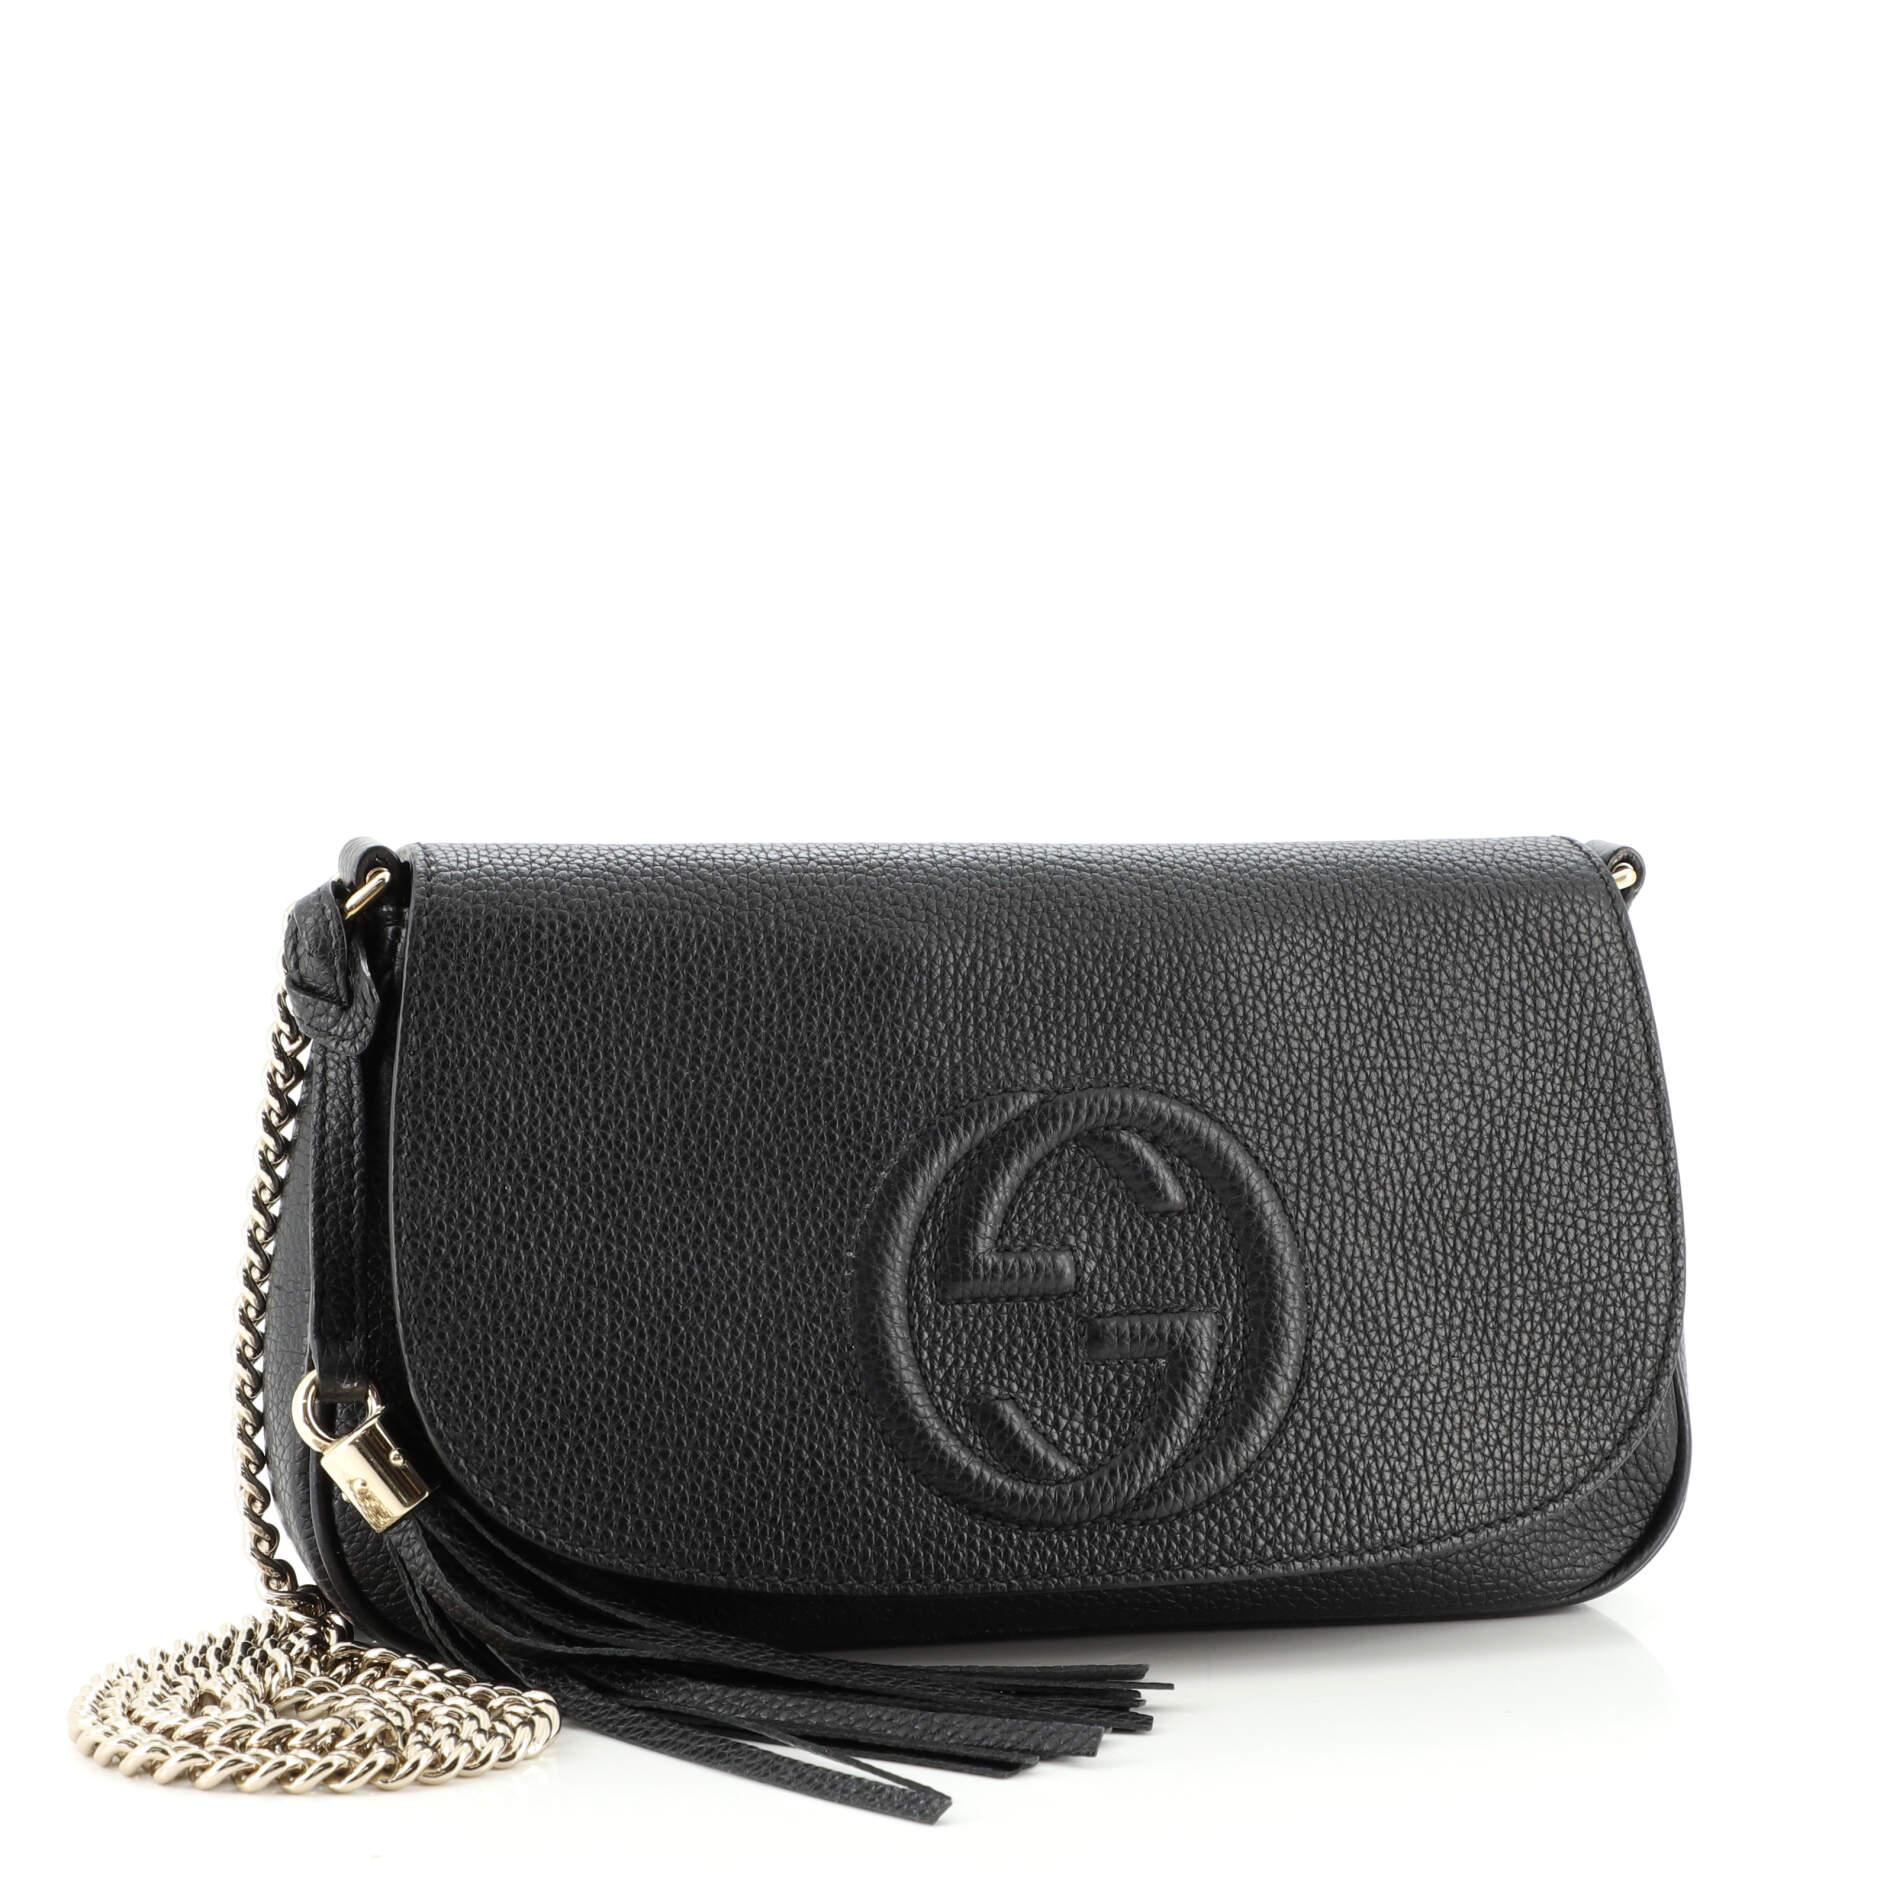 Gucci Outlet Bag - 2 For Sale on 1stDibs gucci outlet store online, handbags gucci outlet, crossbody outlet